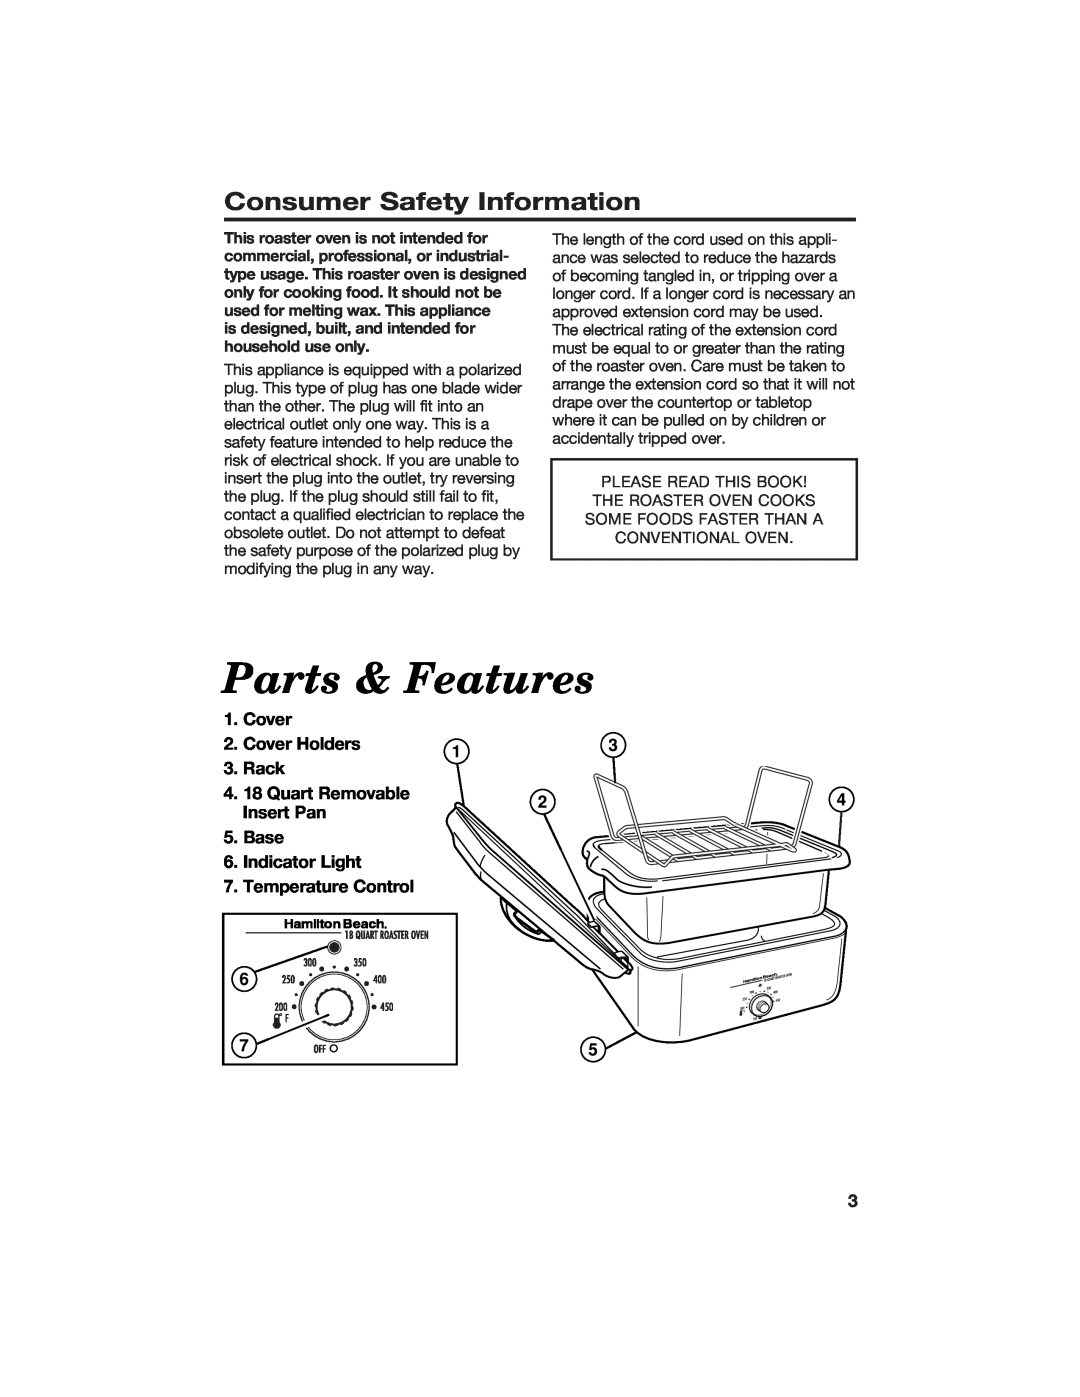 Hamilton Beach 840104300 manual Parts & Features, Consumer Safety Information, Cover 2. Cover Holders 3. Rack 